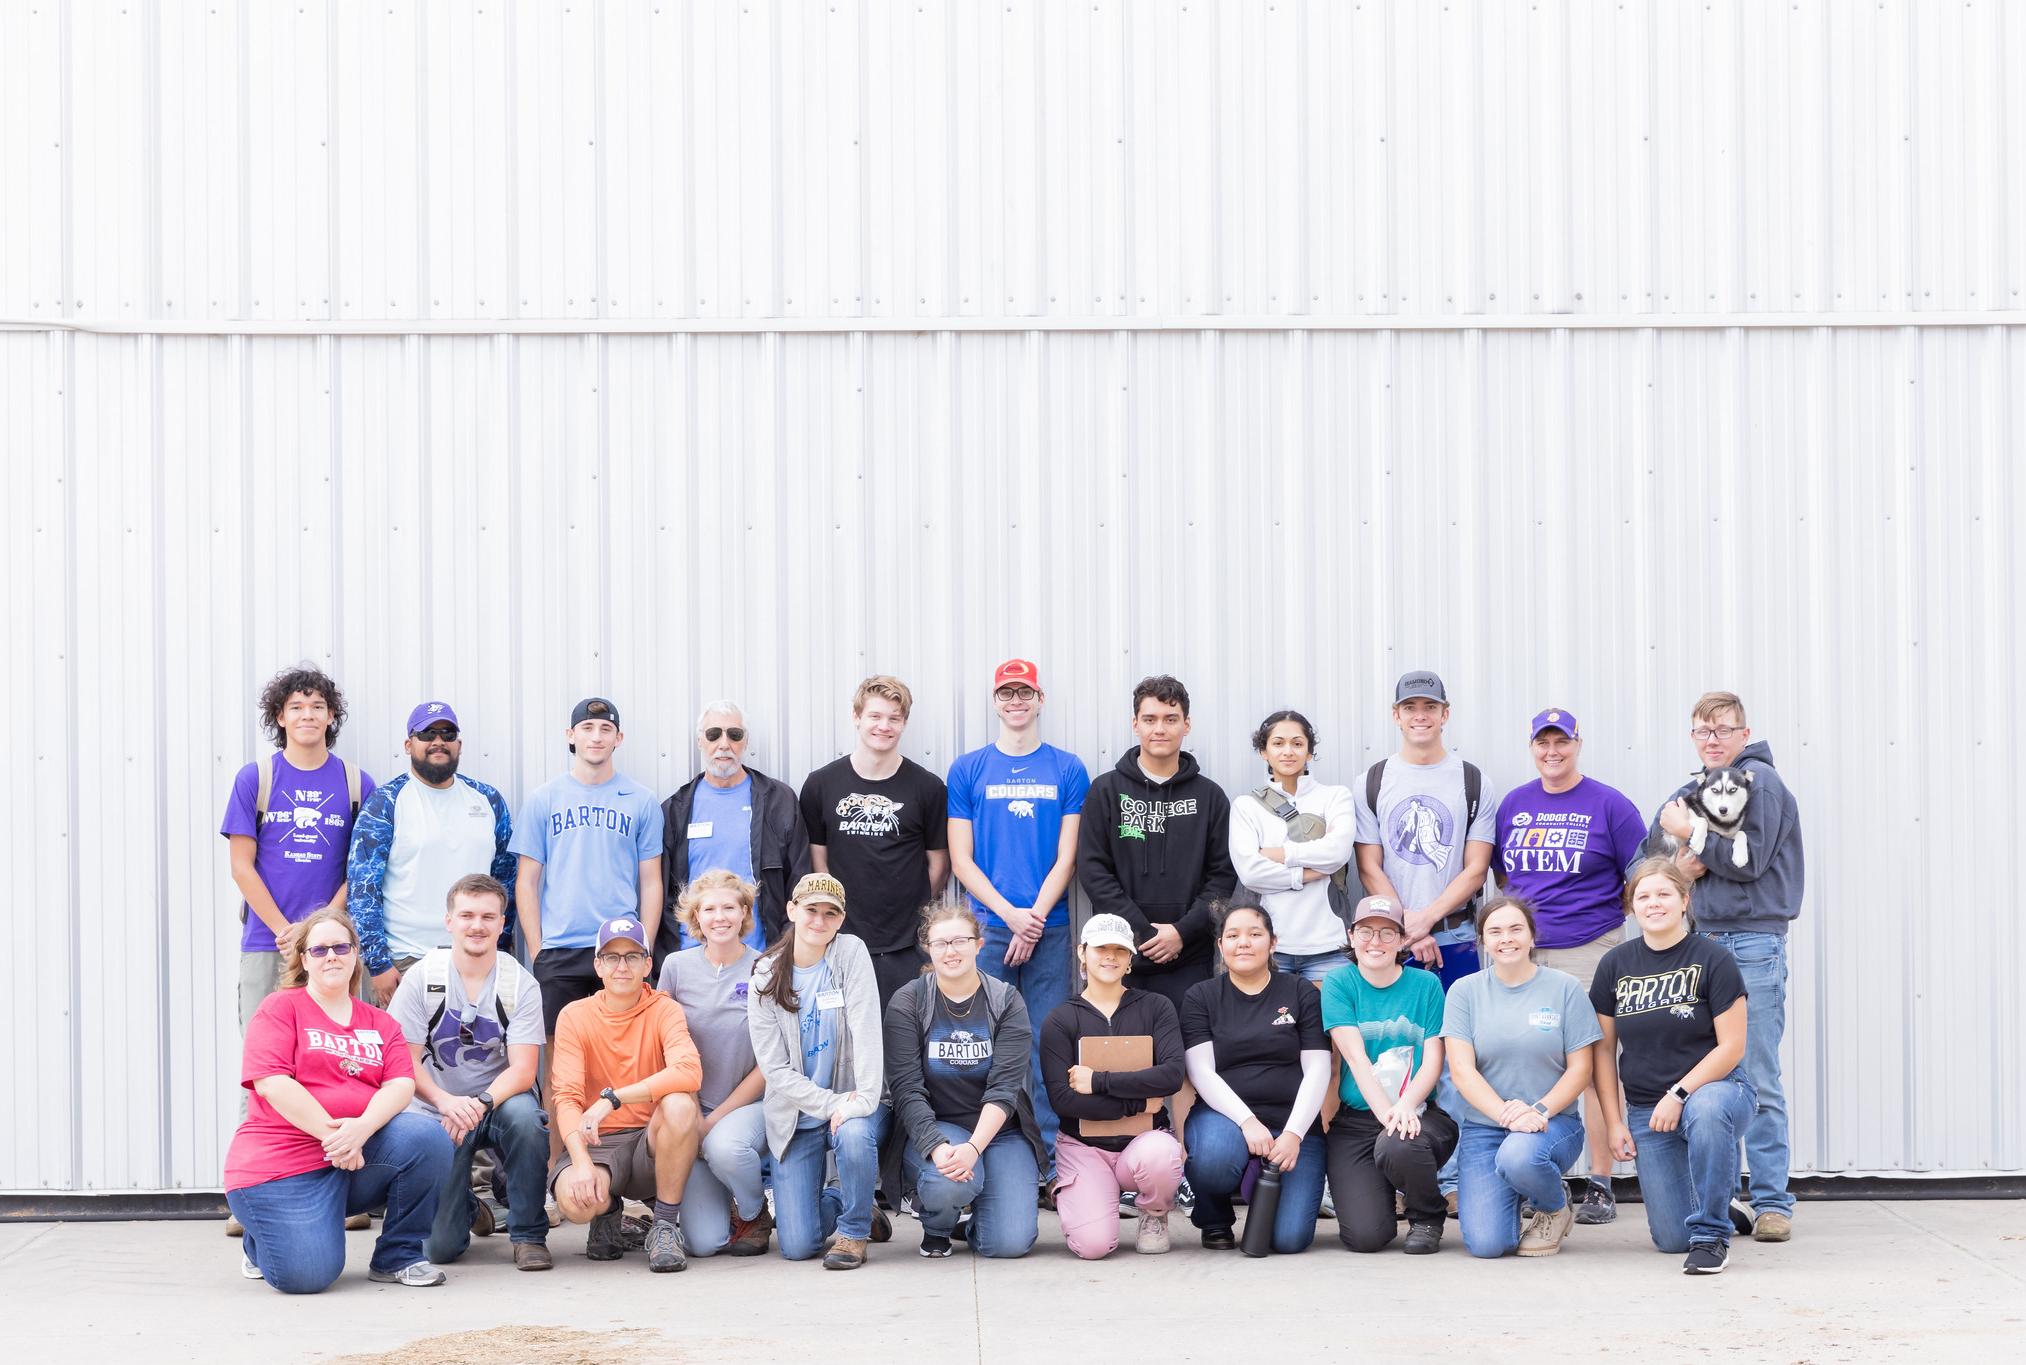 large group of students in front of a metal building in hats, jeans, boots